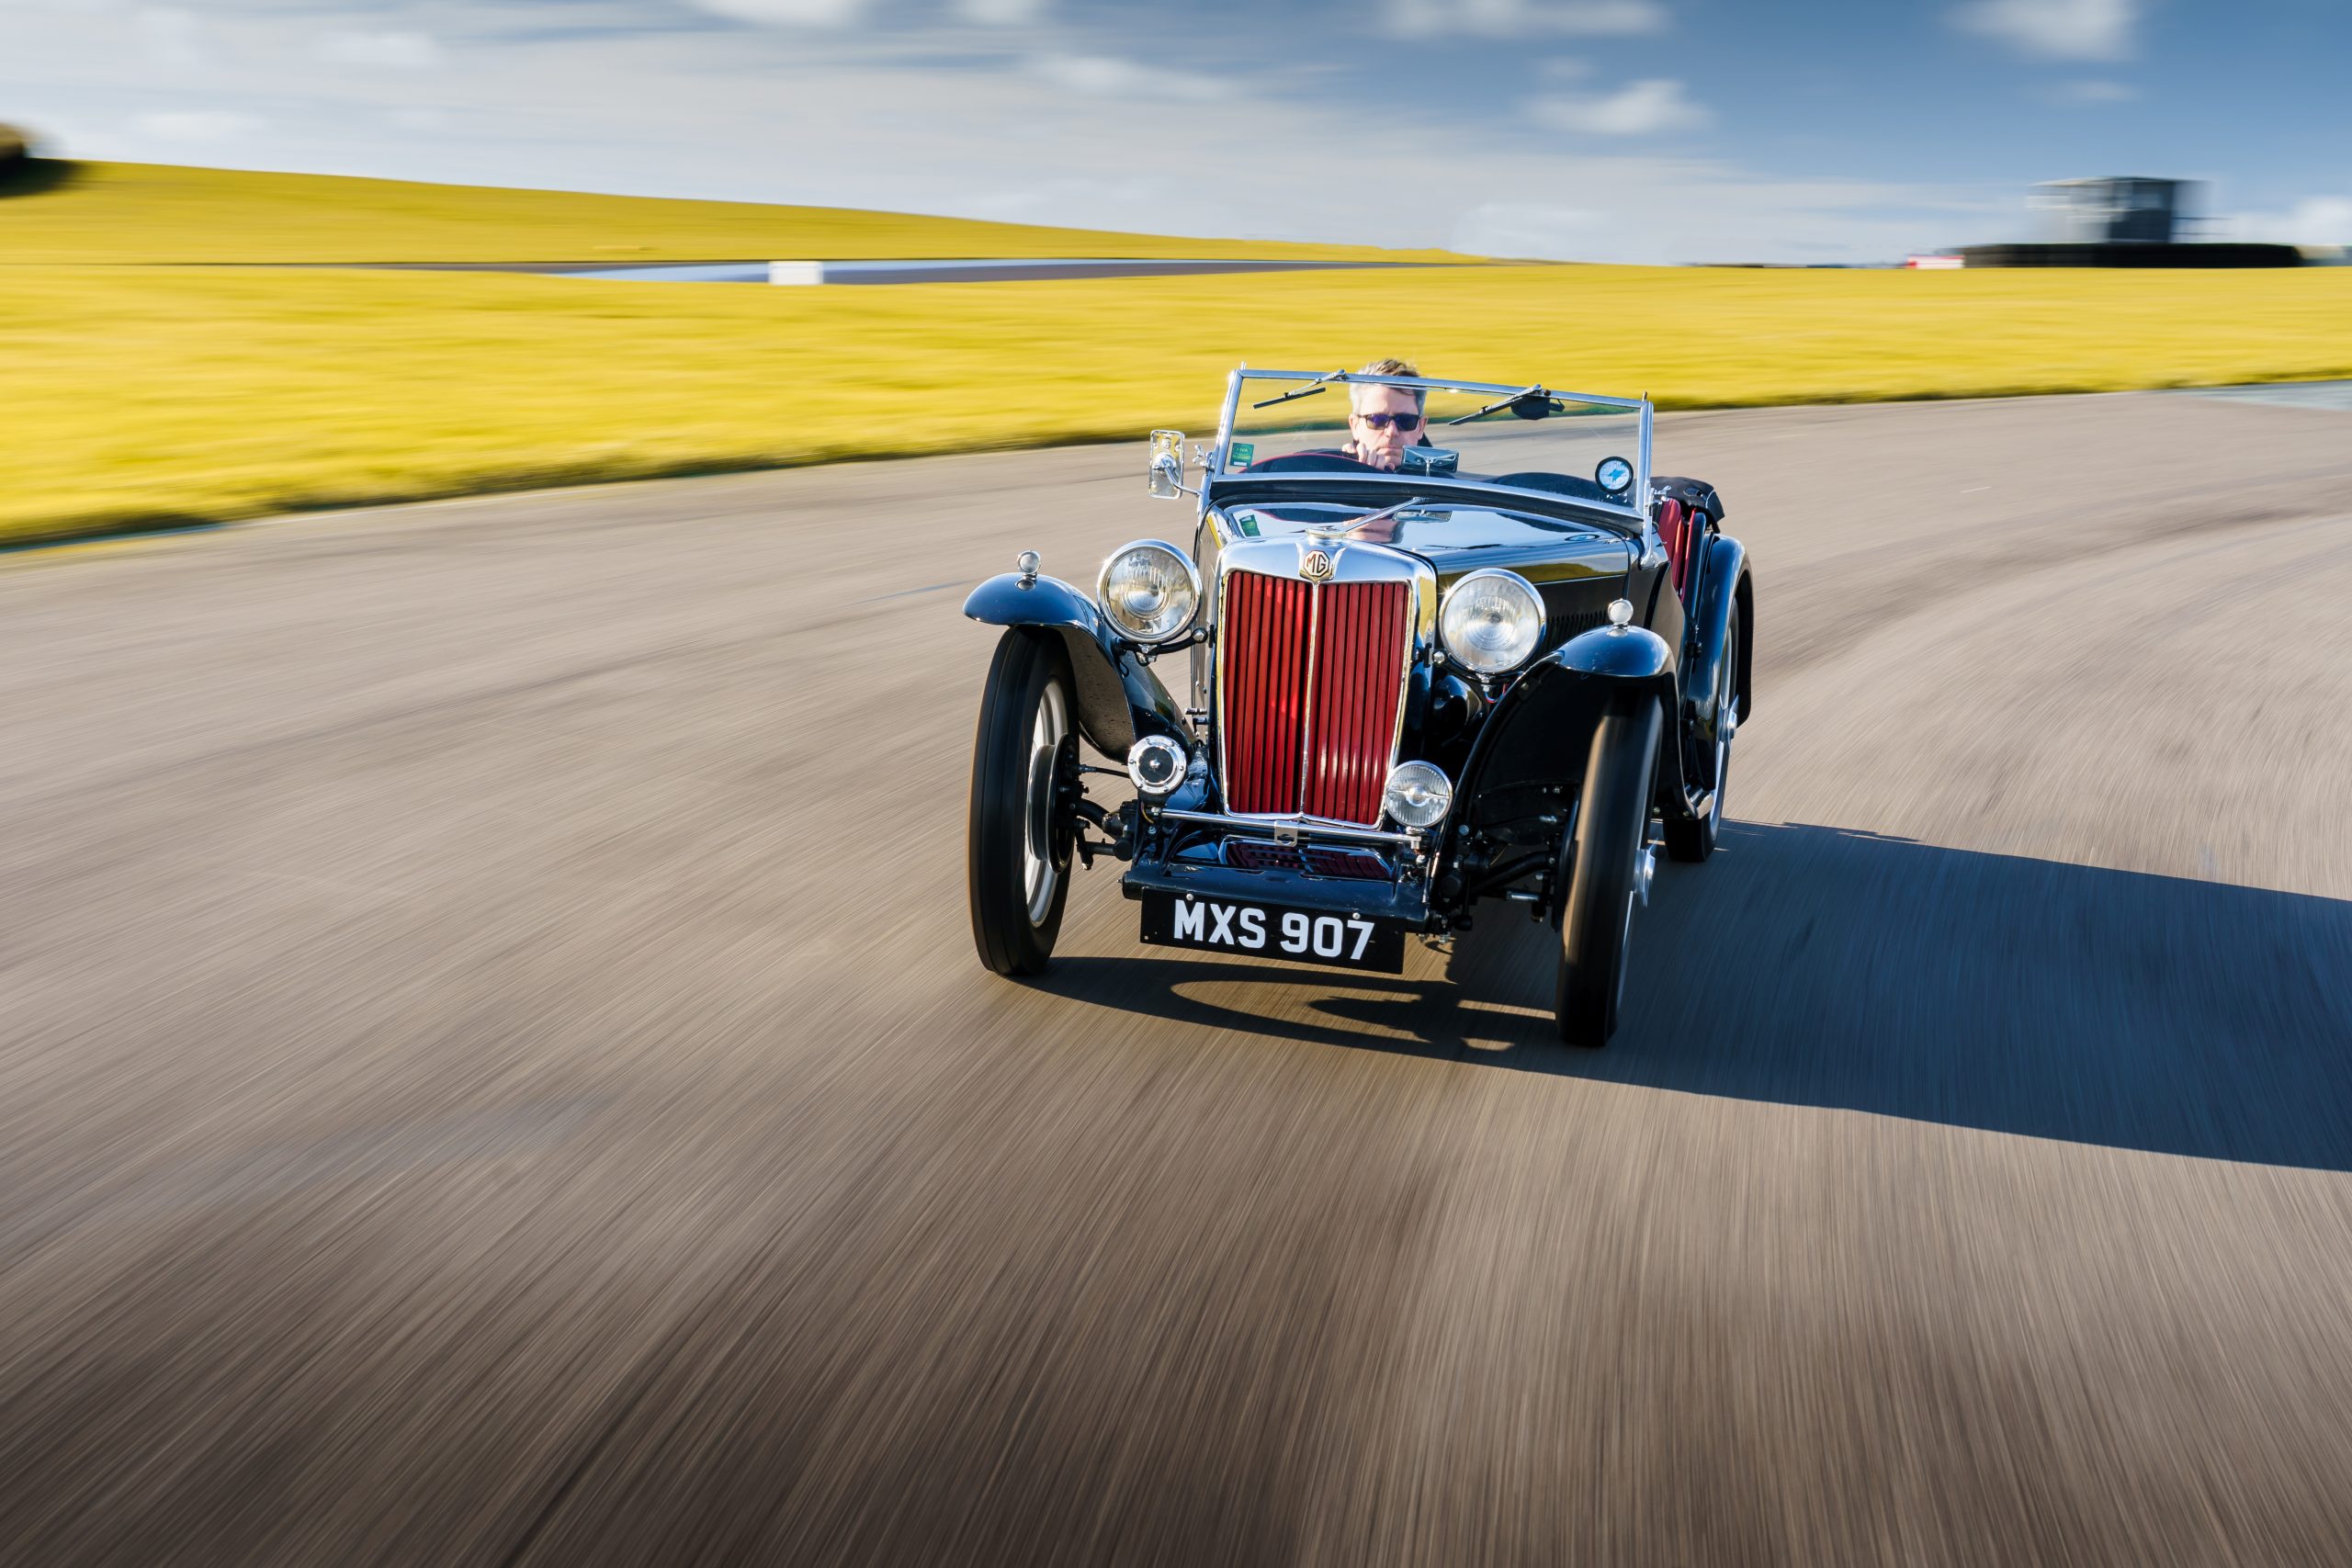 MG TB video: “Motoring from a different age – fabulous!” | Hagerty UK Bull Market List